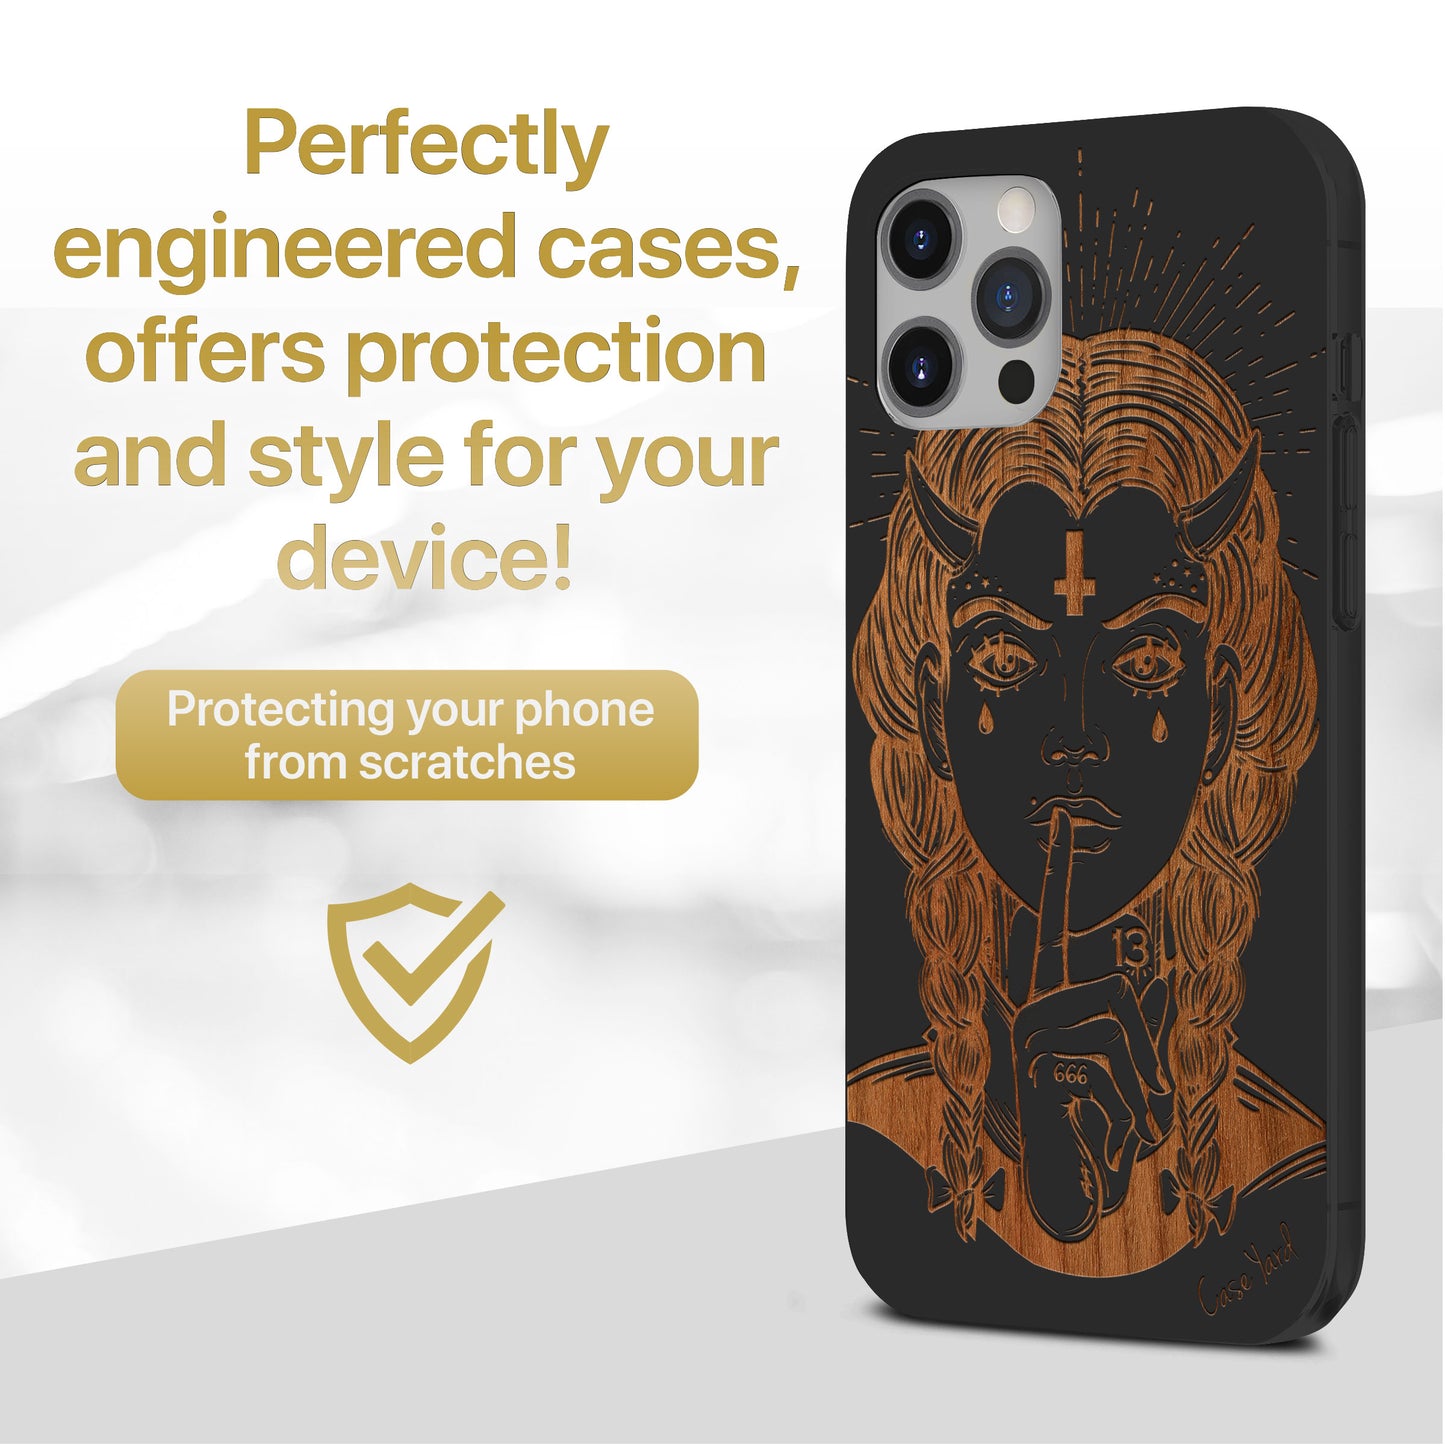 Wooden Cell Phone Case Cover, Laser Engraved case for iPhone & Samsung phone Demon Girl Design